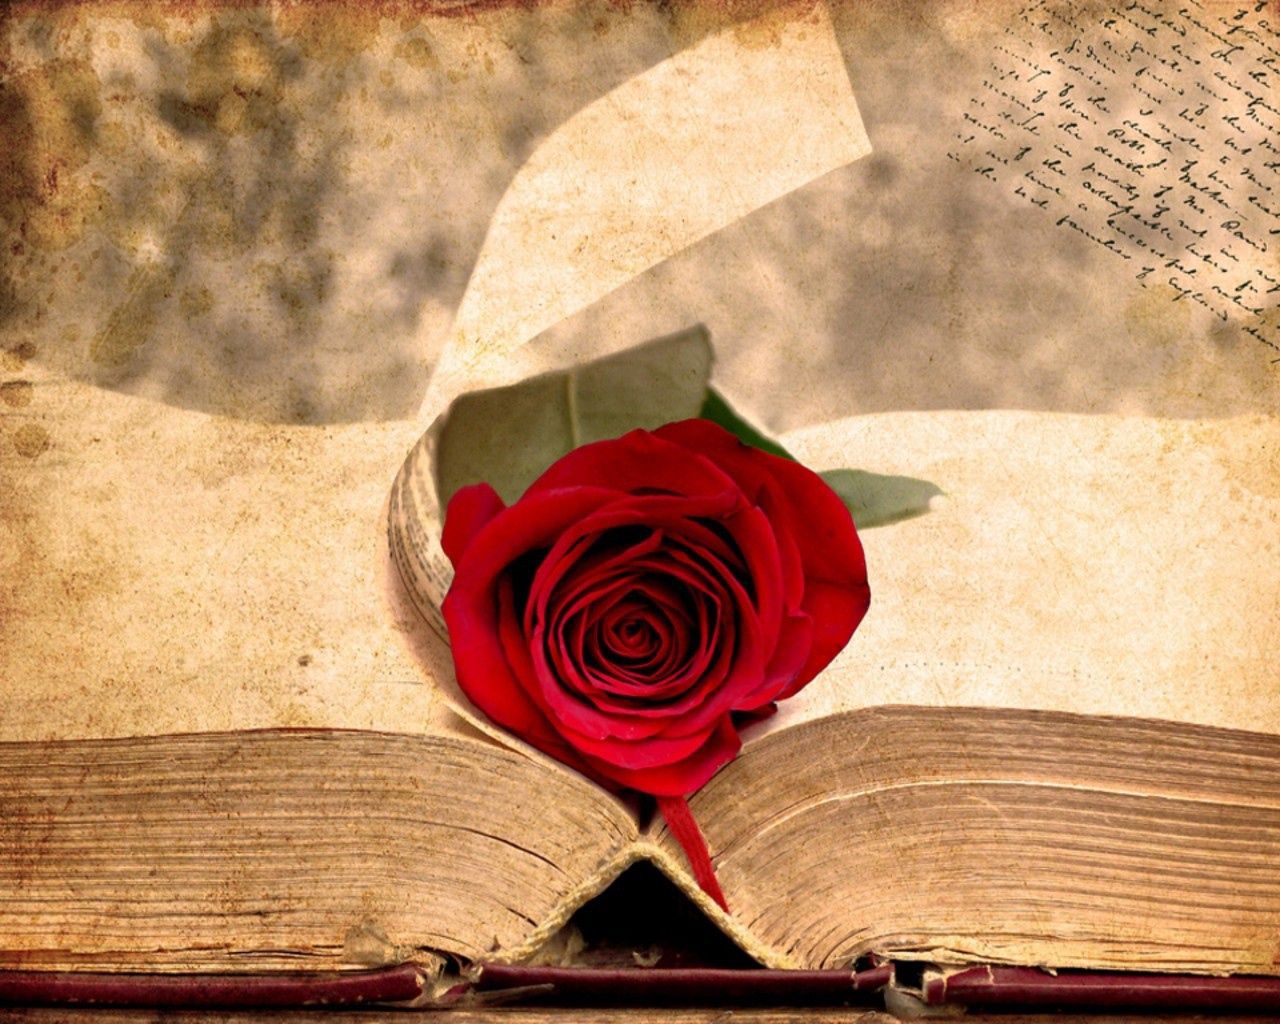 The rose on the ancient book Desktop wallpaper 1280x1024